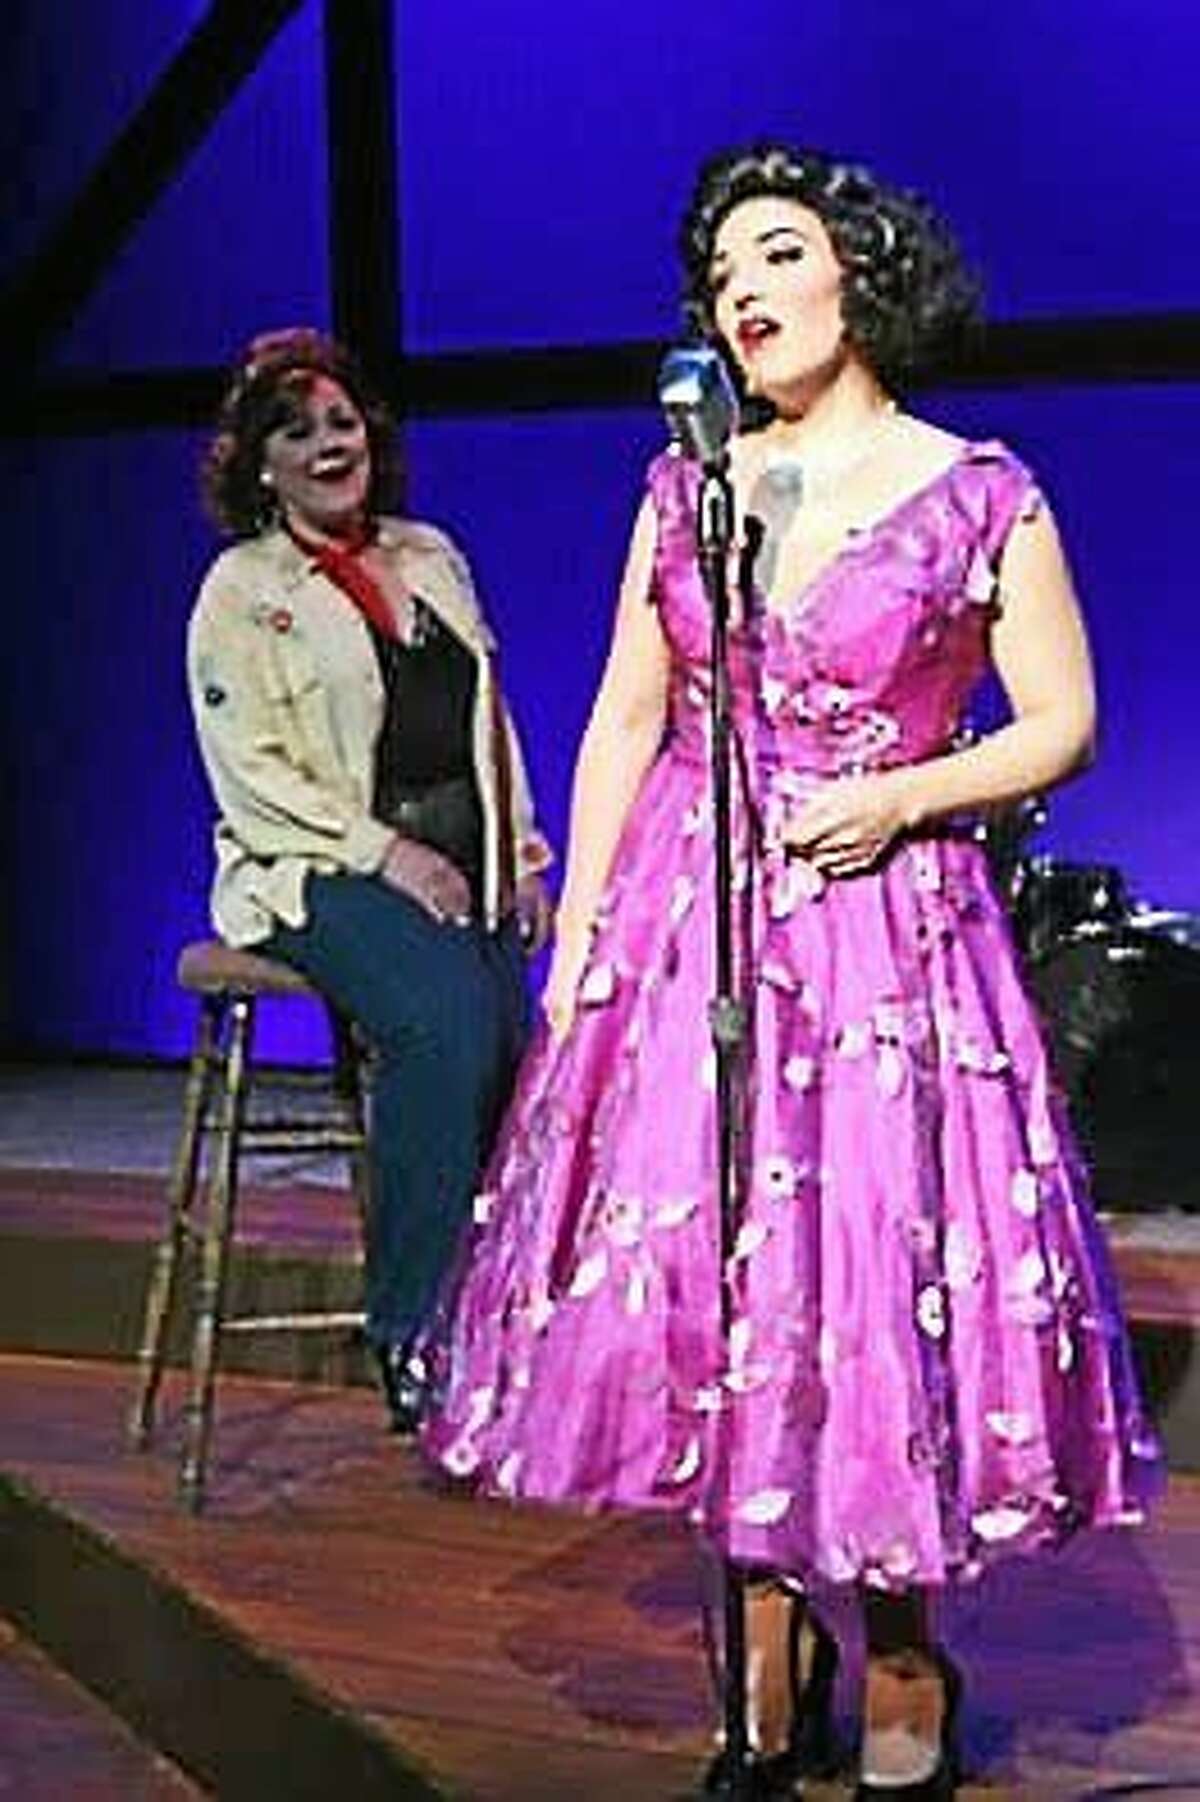 Contributed photo Patsy Cline's magical music comes to life at the Seven Angels Theater in Waterbury.